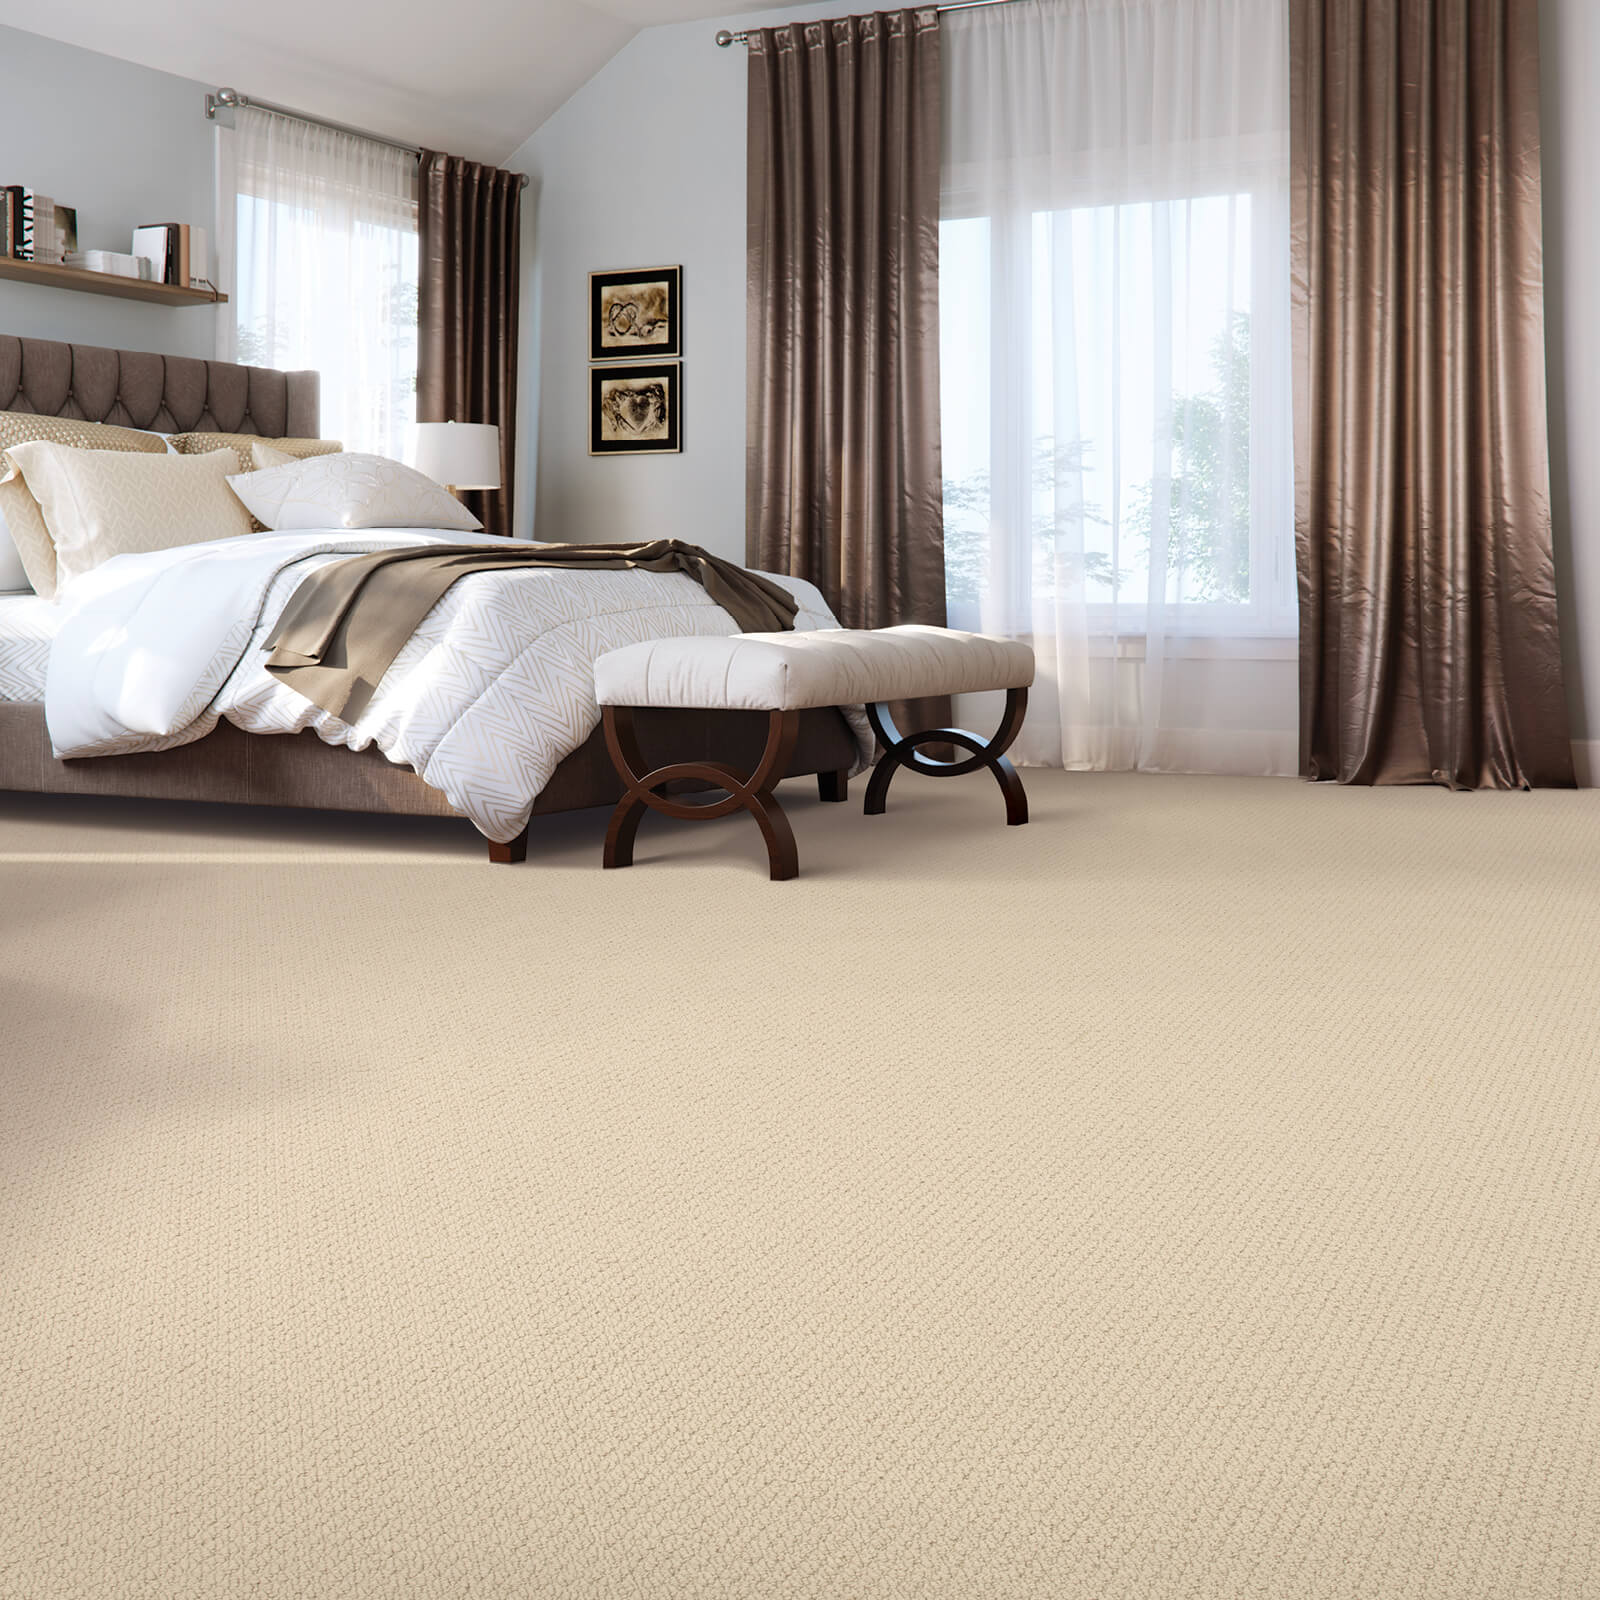 Brown Carpet With Curtains | Location Carpet